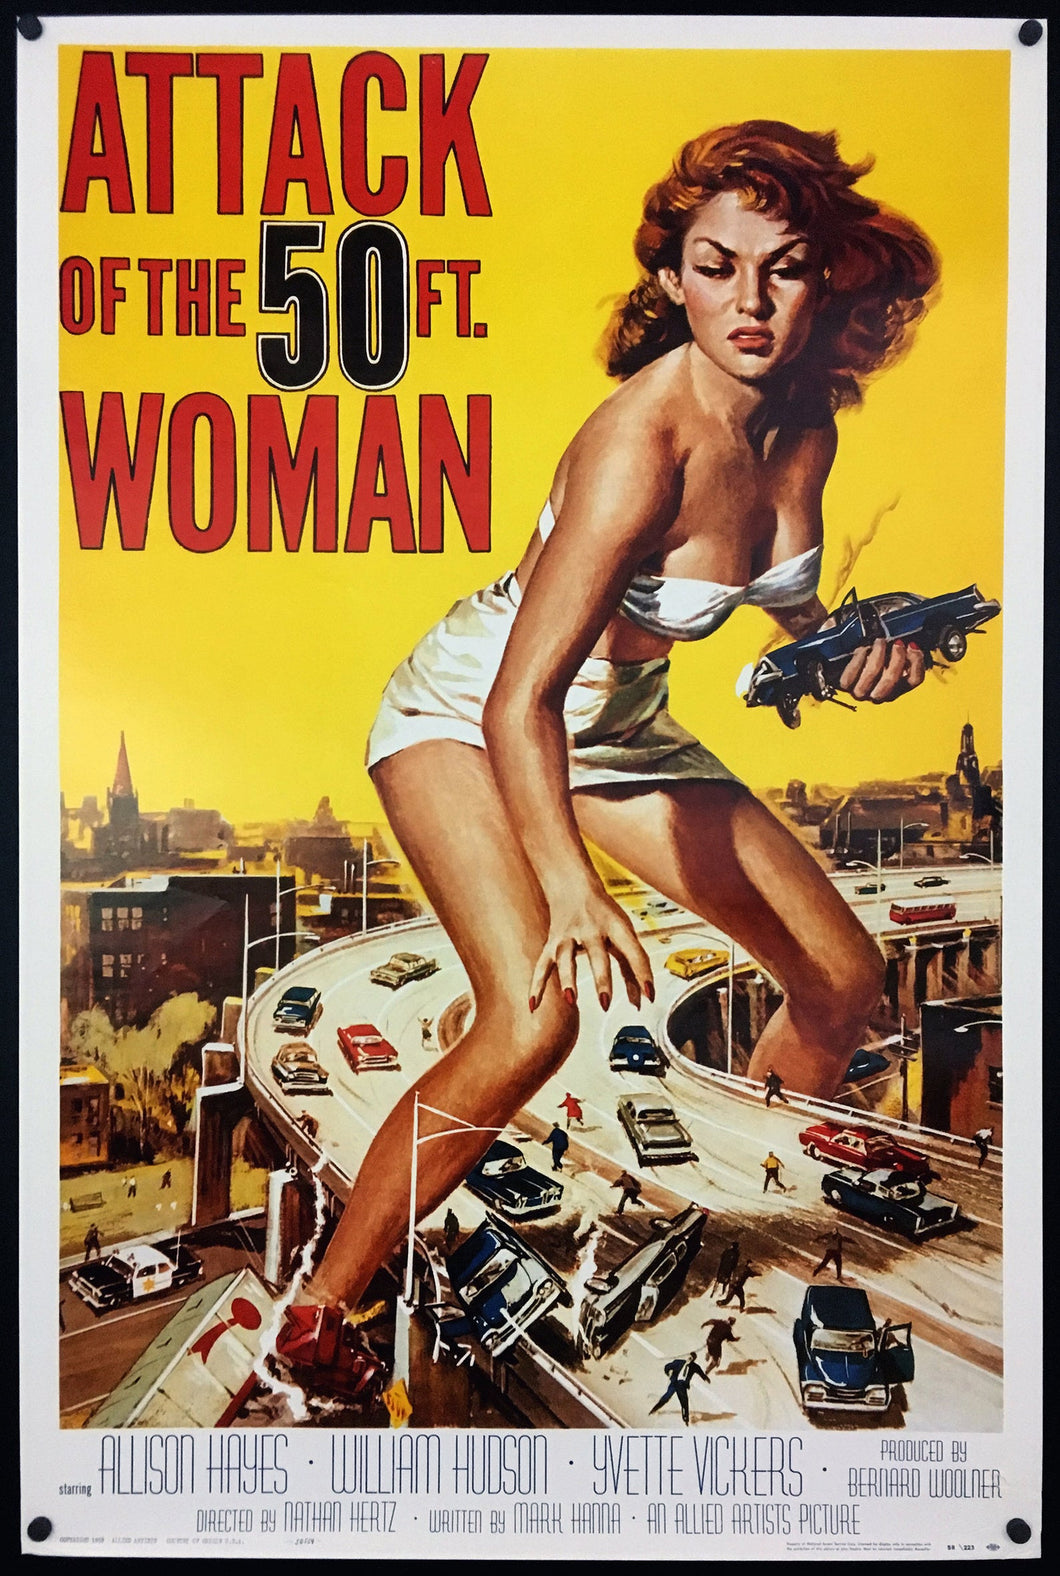 Attack of the 50FT Woman | Vintage Large Movie Poster | 1990s | Allison Hayes